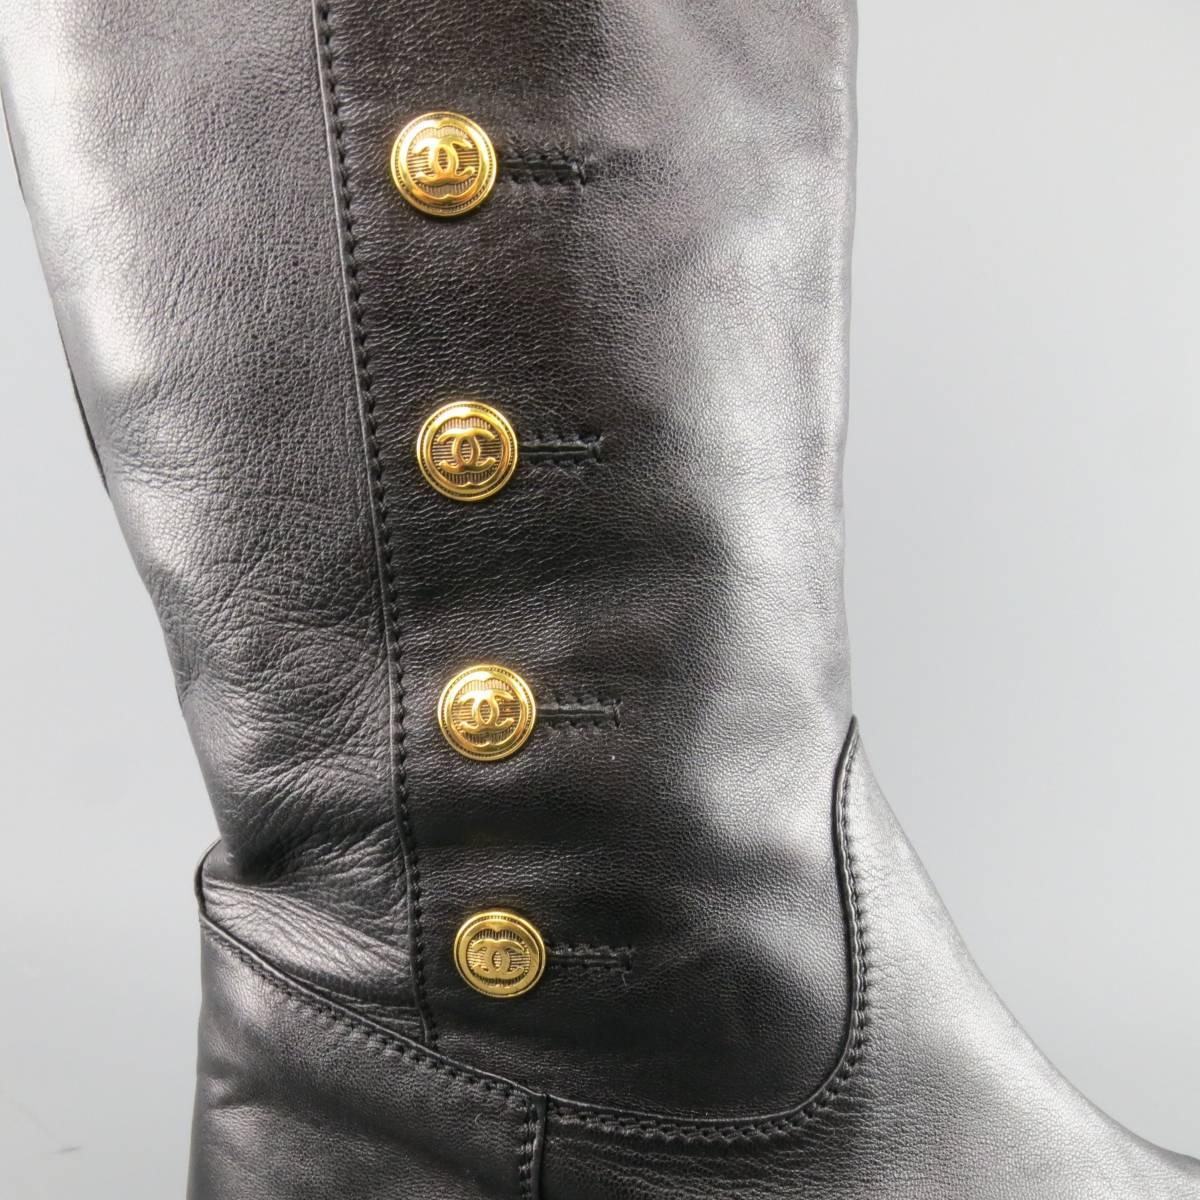 Vintage CHANEL knee high pull on boots in a smooth black leather featuring a rounded point toe and simulated gold tone CC button up sides. Minor wear and imperfection on toe. As-Is. Made in Italy.
 
Fair Pre-Owned Condition.
Marked: IT 41
 
Outsole: